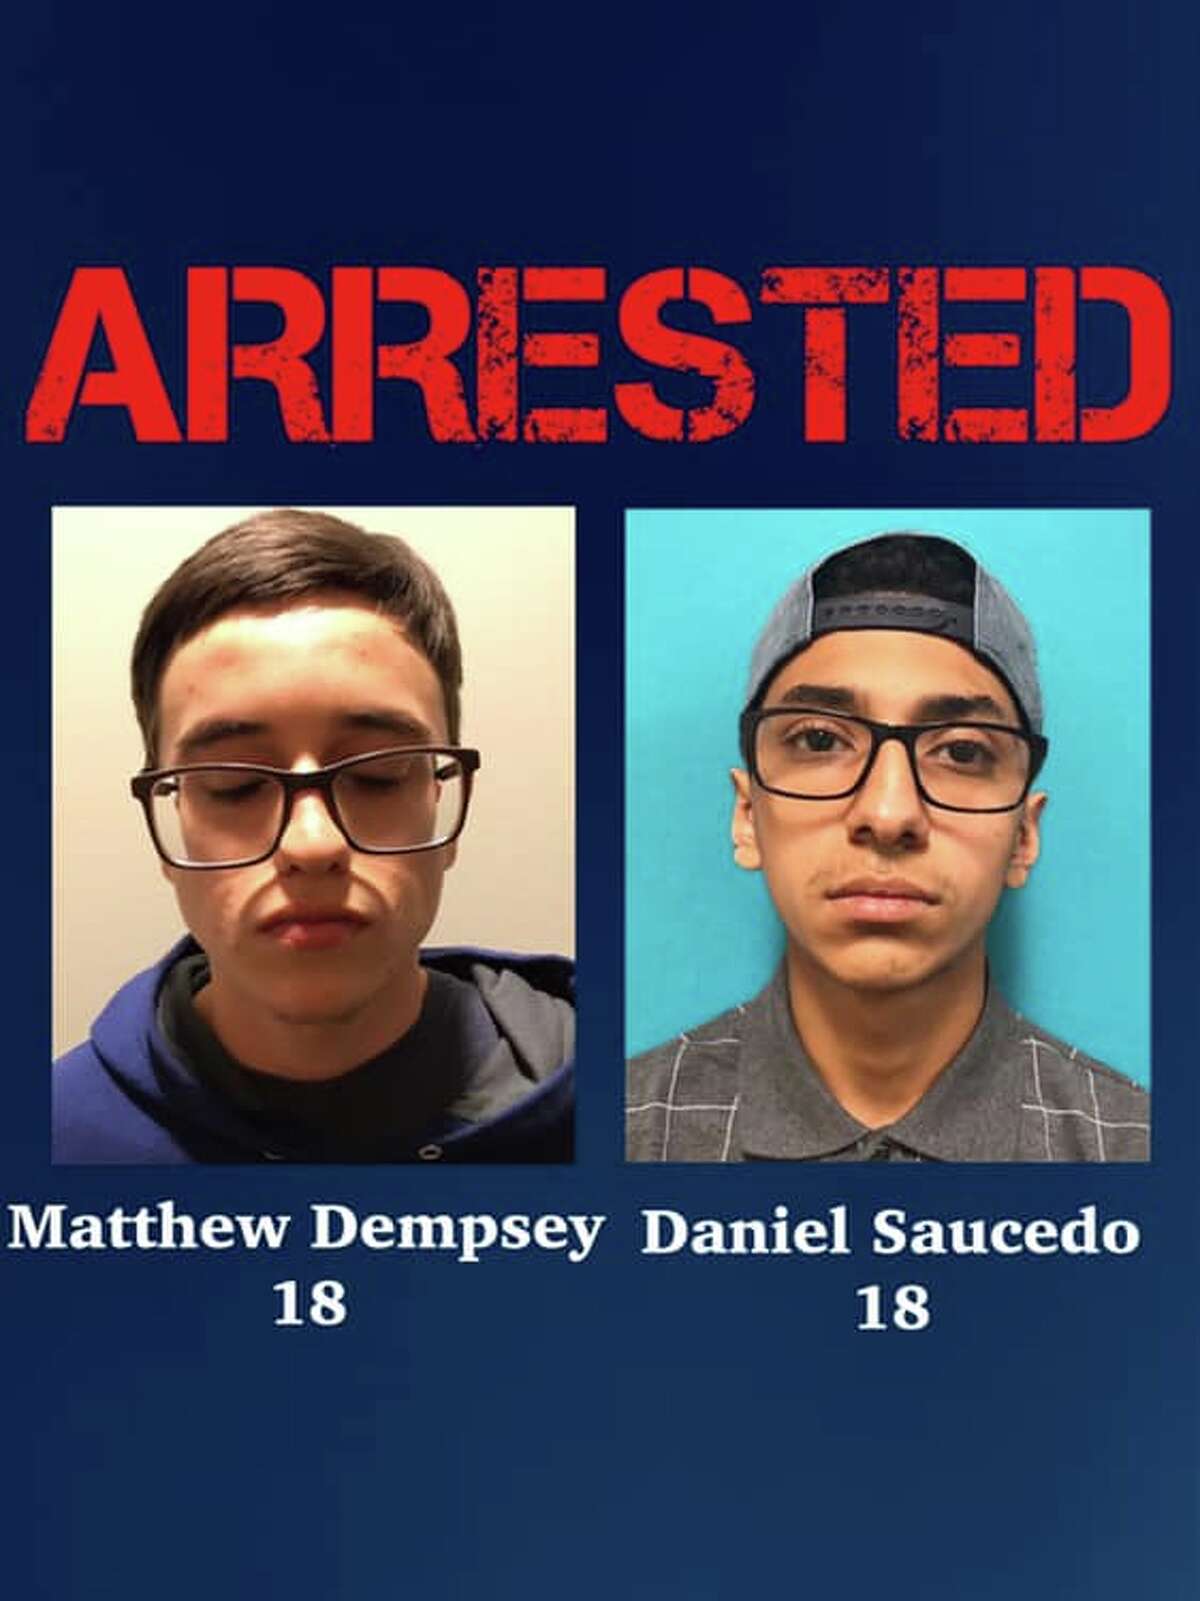 Daniel Saucedo, 18, now faces a charge of capital murder in the death of Mary Dempsey. Dempsey's son, Matthew, was arrested Tuesday in connection to her death.